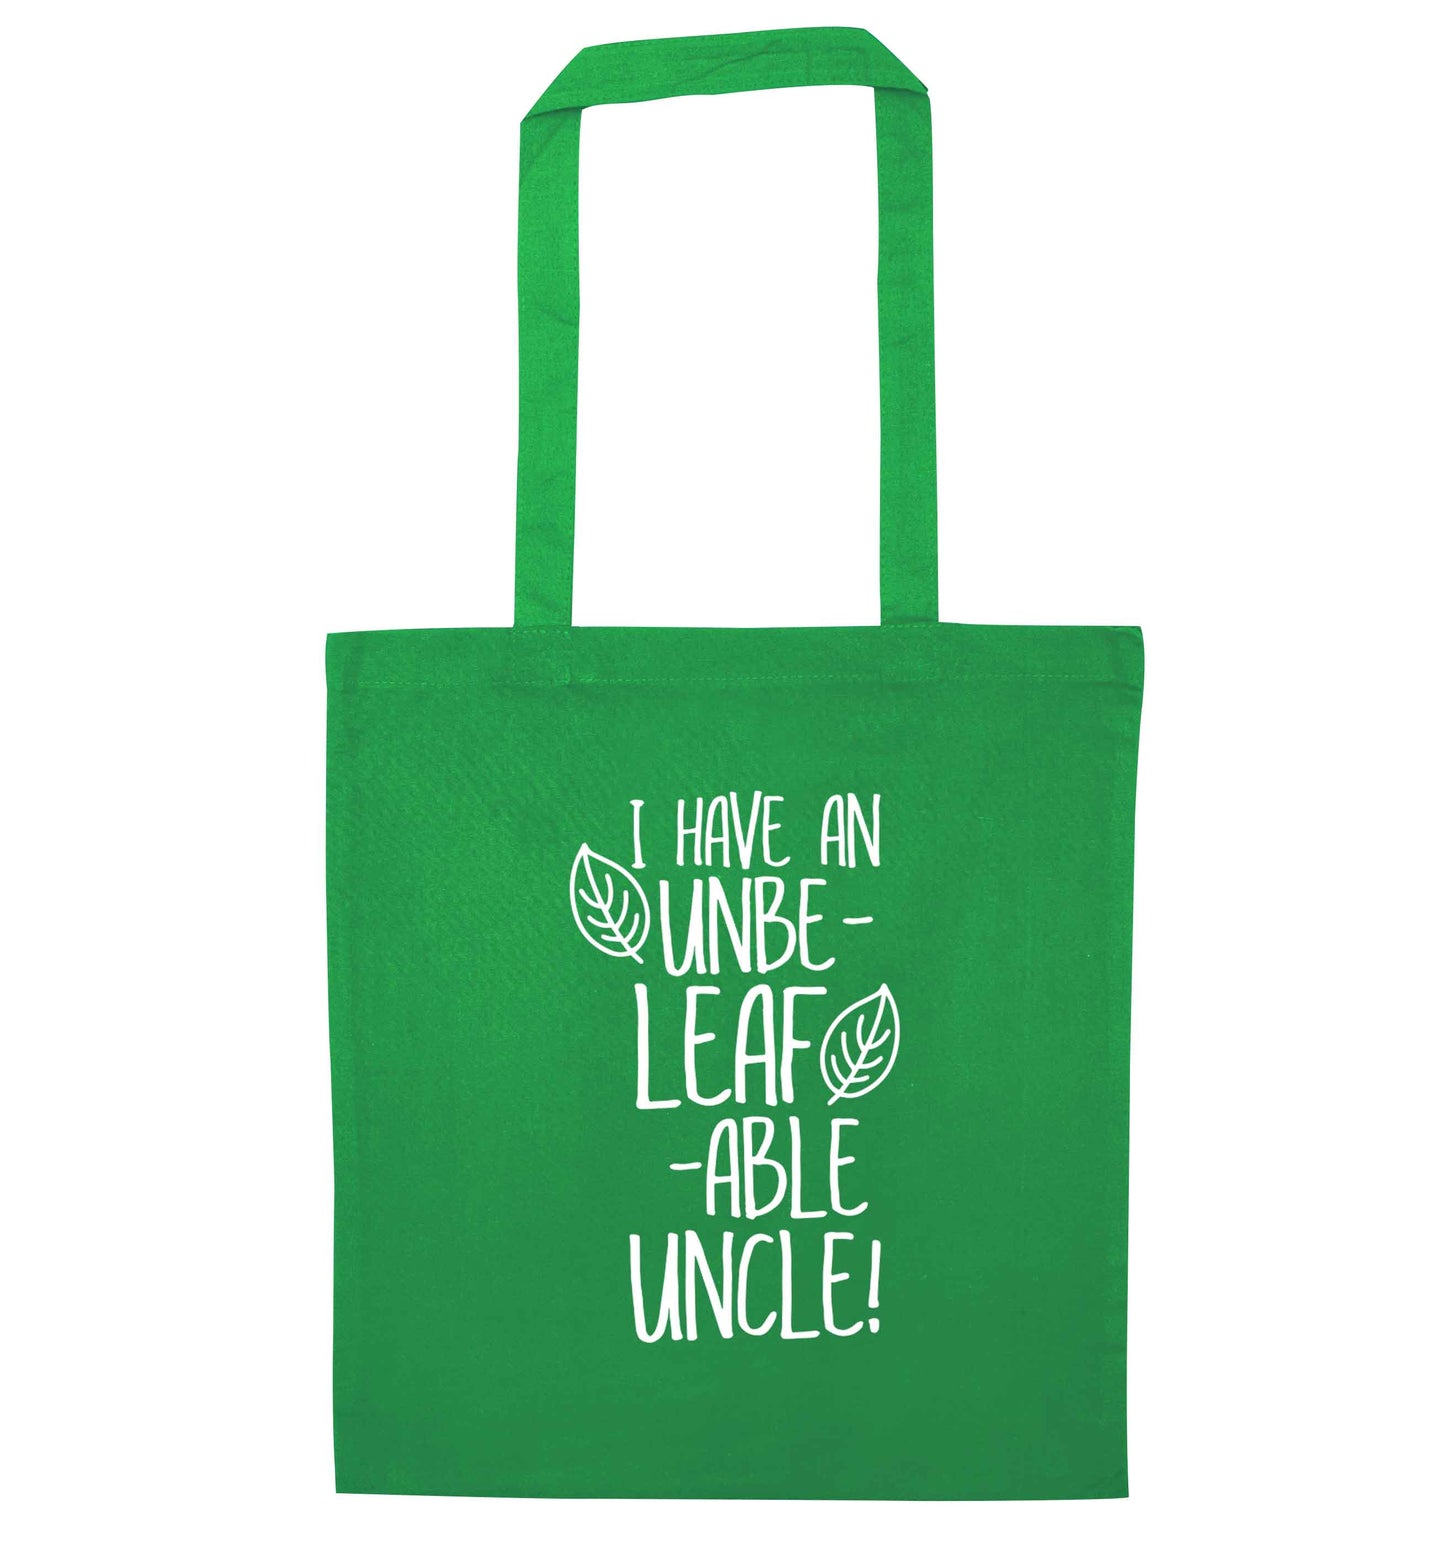 I have an unbe-leaf-able uncle green tote bag